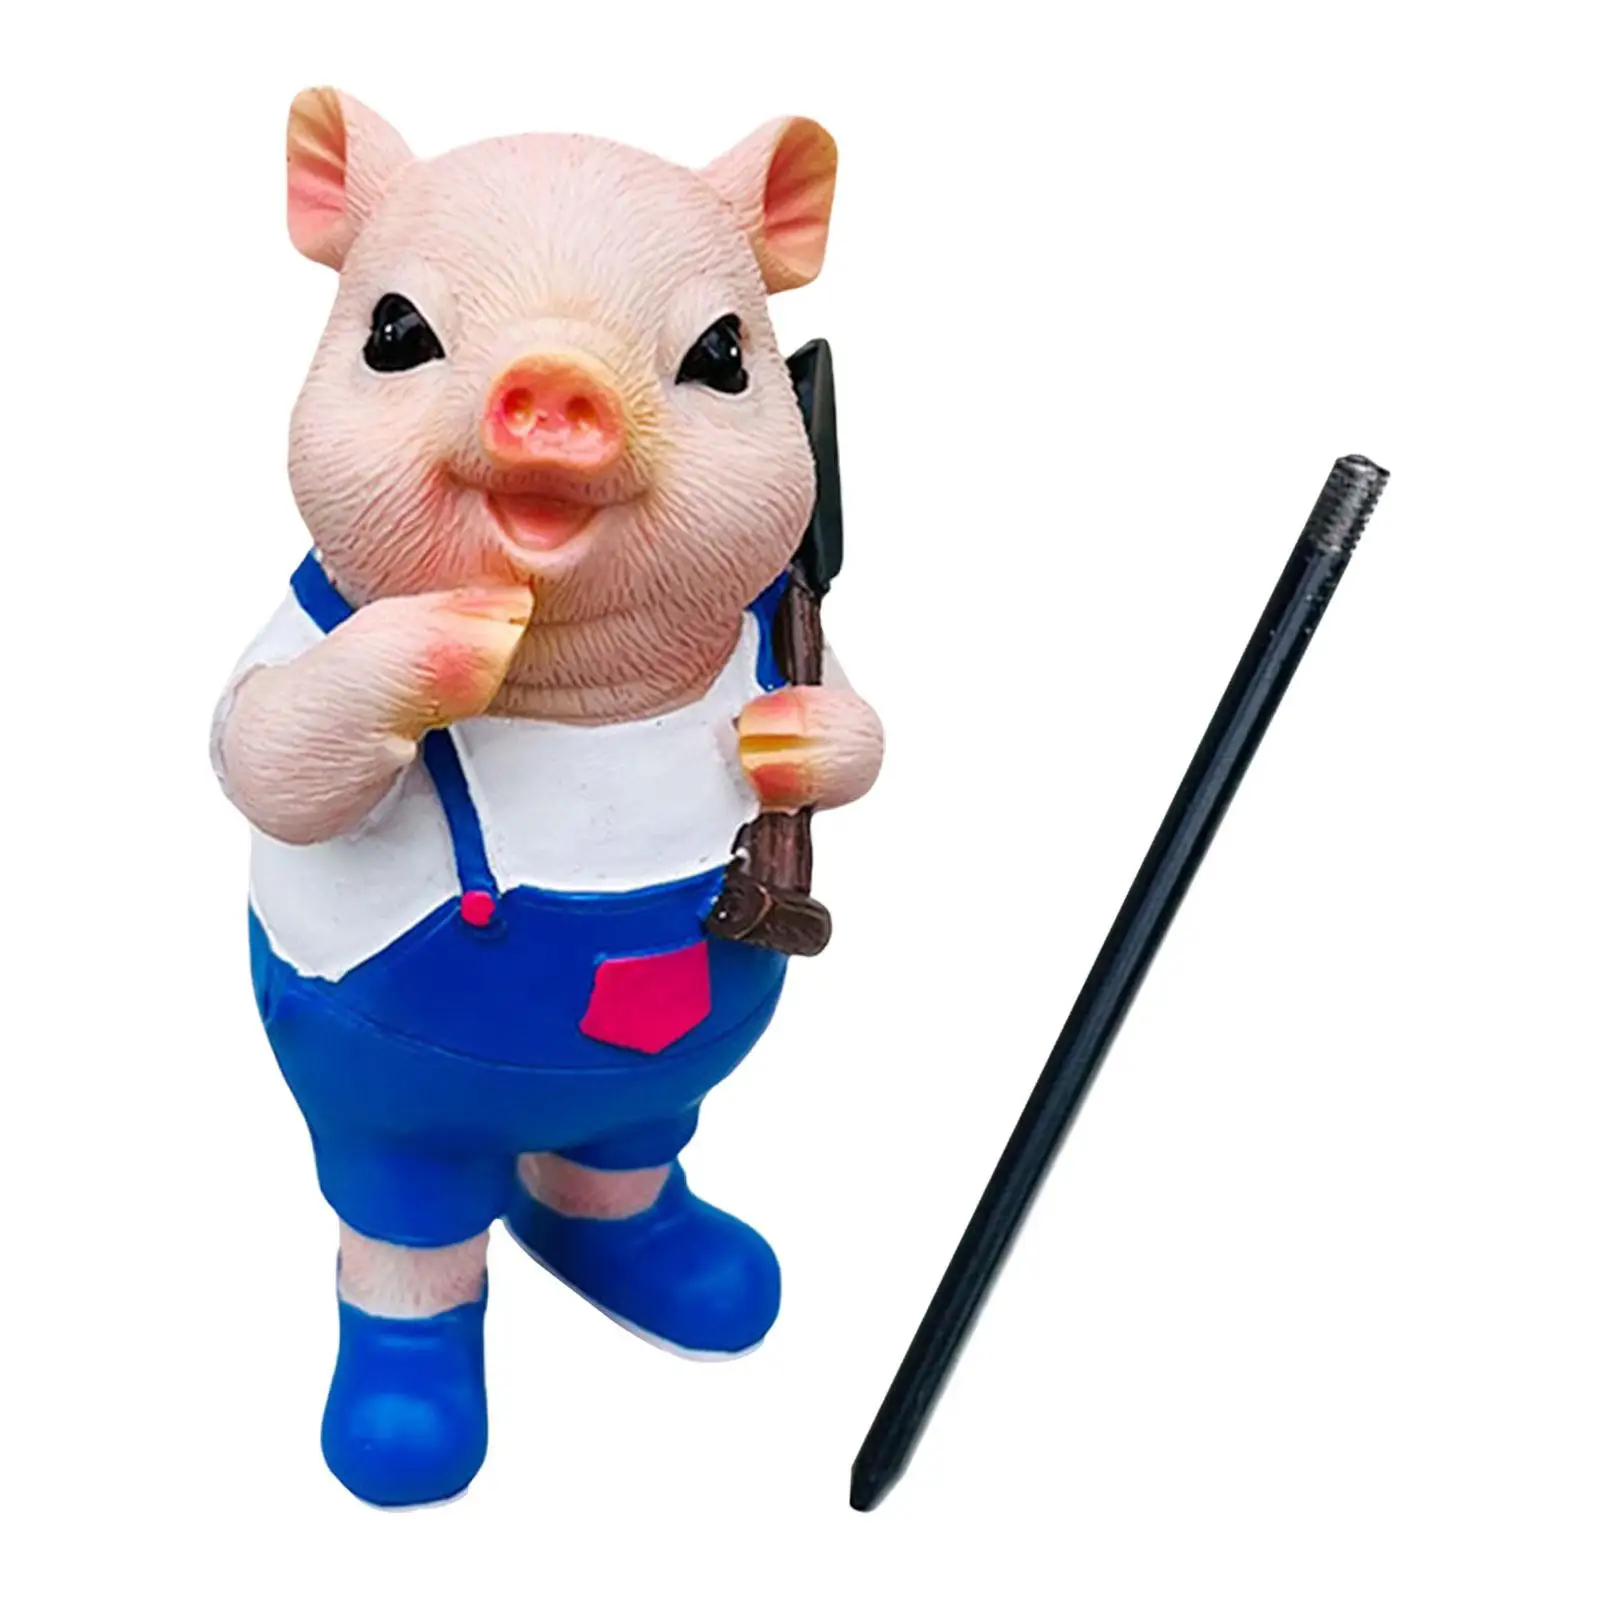 Resin Pig Stakes Outdoor Pig Sculptures Animal Garden Statue for Pathway Lawn Plant Pot Micro Landscape Decoration